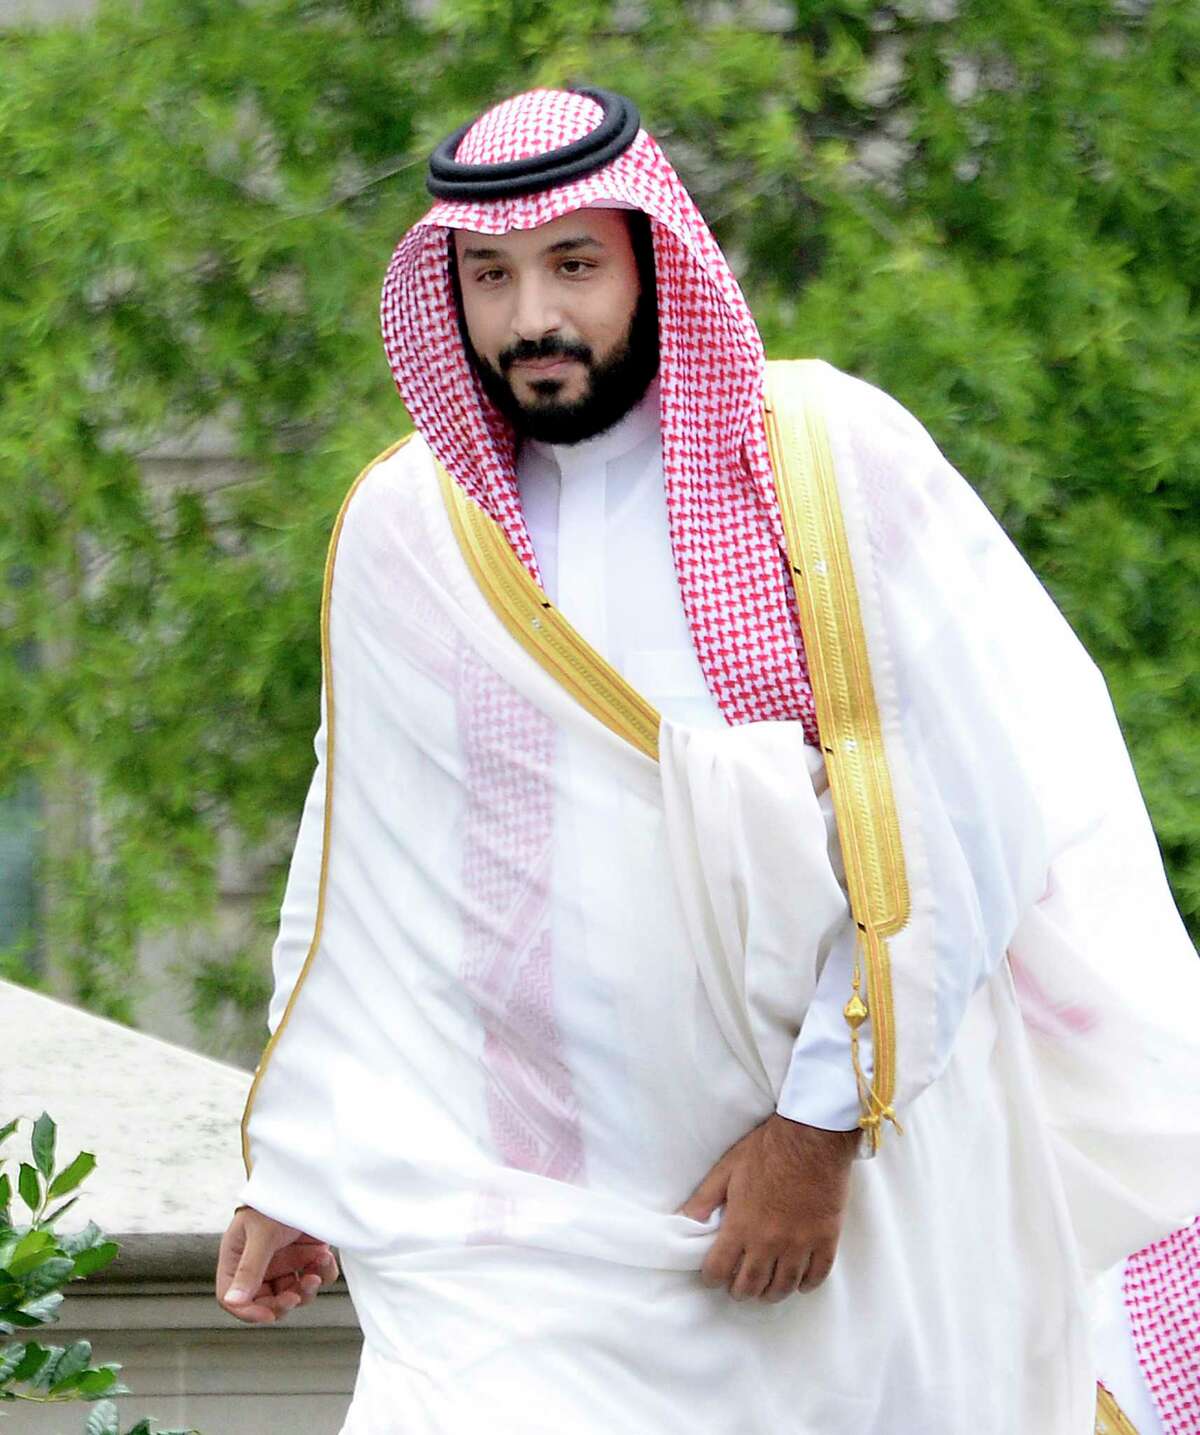 Mohammed bin Salman of Saudi Arabia arrives at the White House to attend a meeting with President Barack Obama on June 17, 2016, in Washington, D.C. S(Olivier Douliery/Abaca Press/TNS)